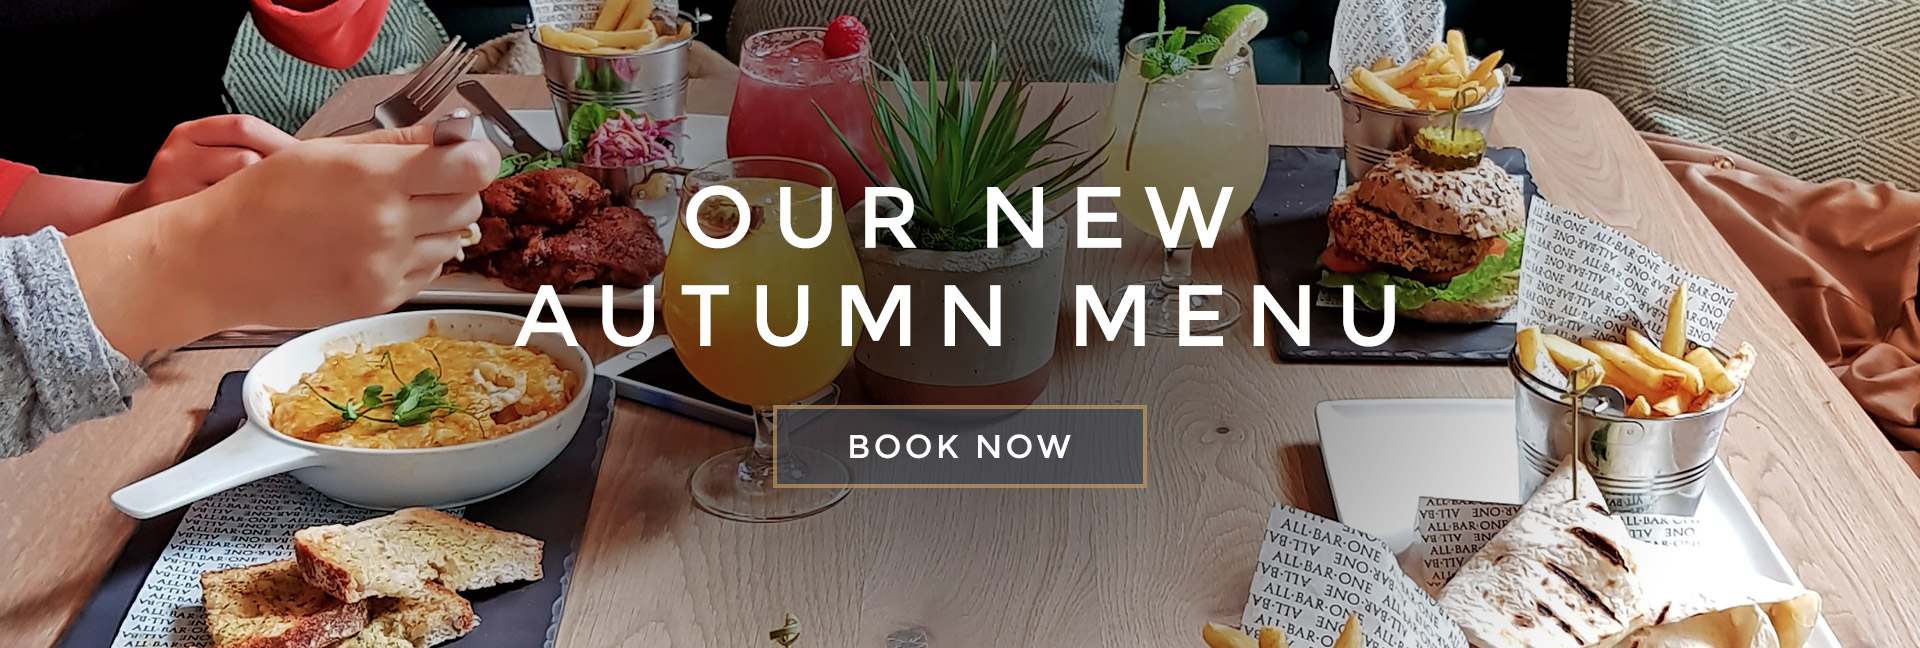 Our new Autumn menu at All Bar One Newhall Street Birmingham - Book now